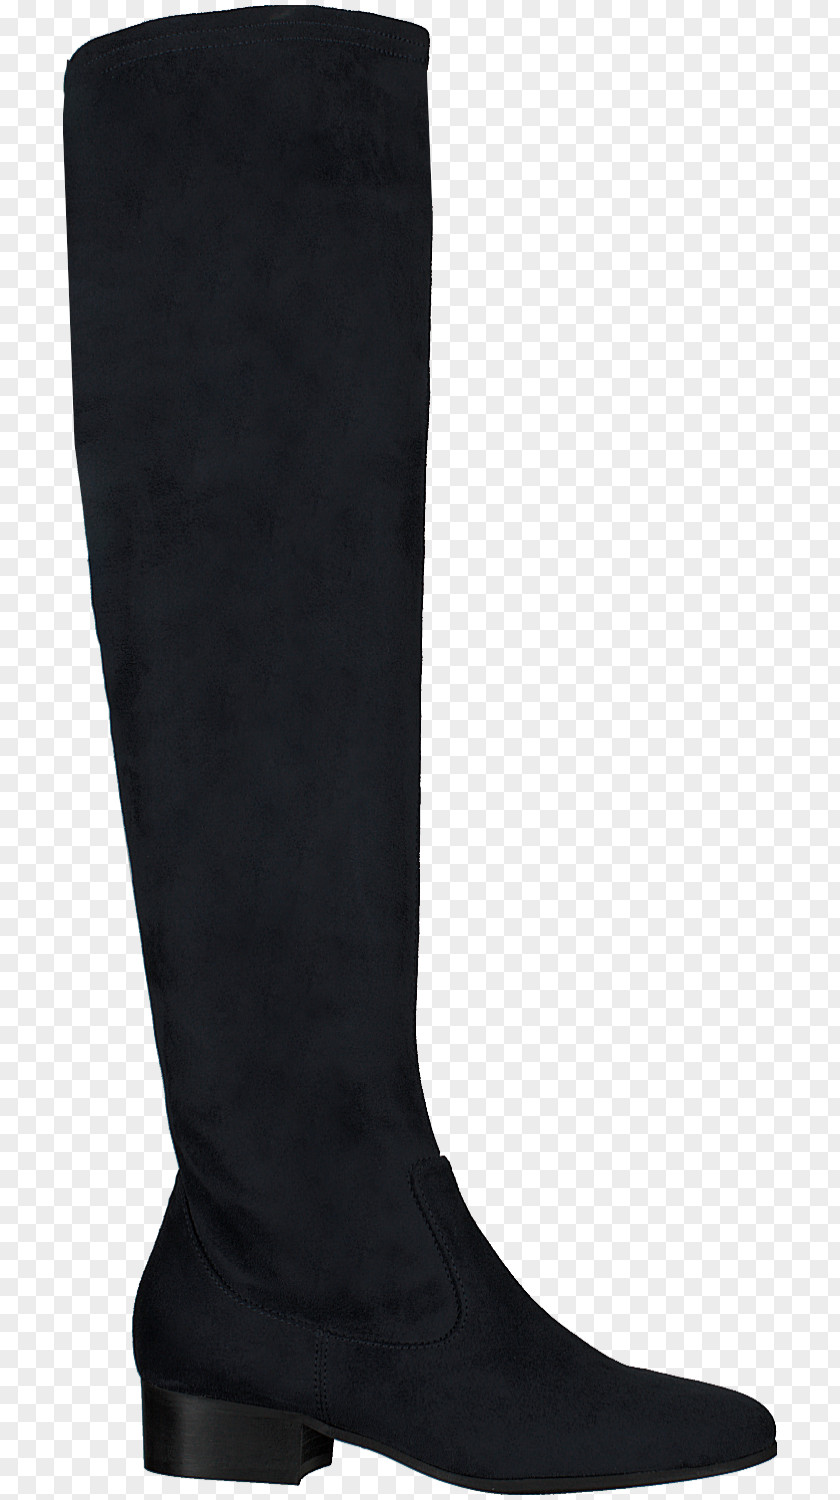 Knee High Boots Riding Boot Shoe Knee-high Fashion PNG